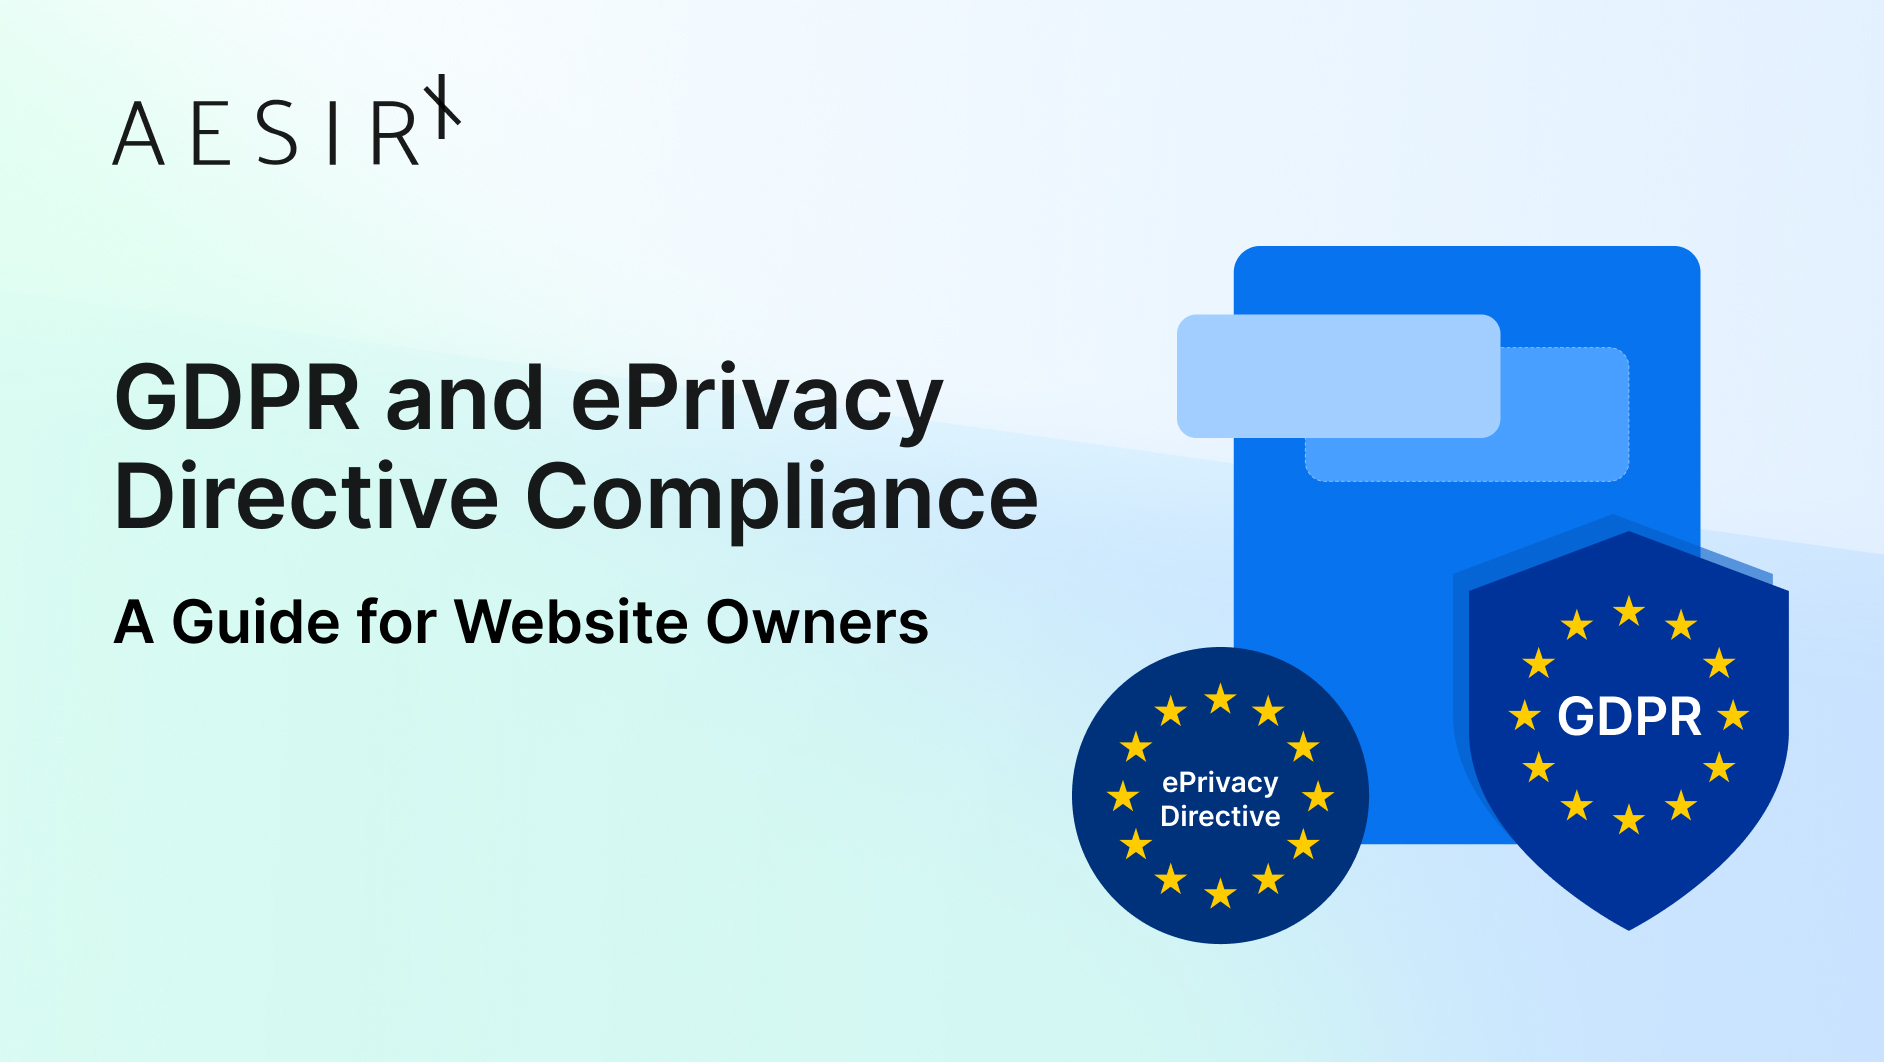 GDPR and ePrivacy Directive Compliance: A Guide for Website Owners